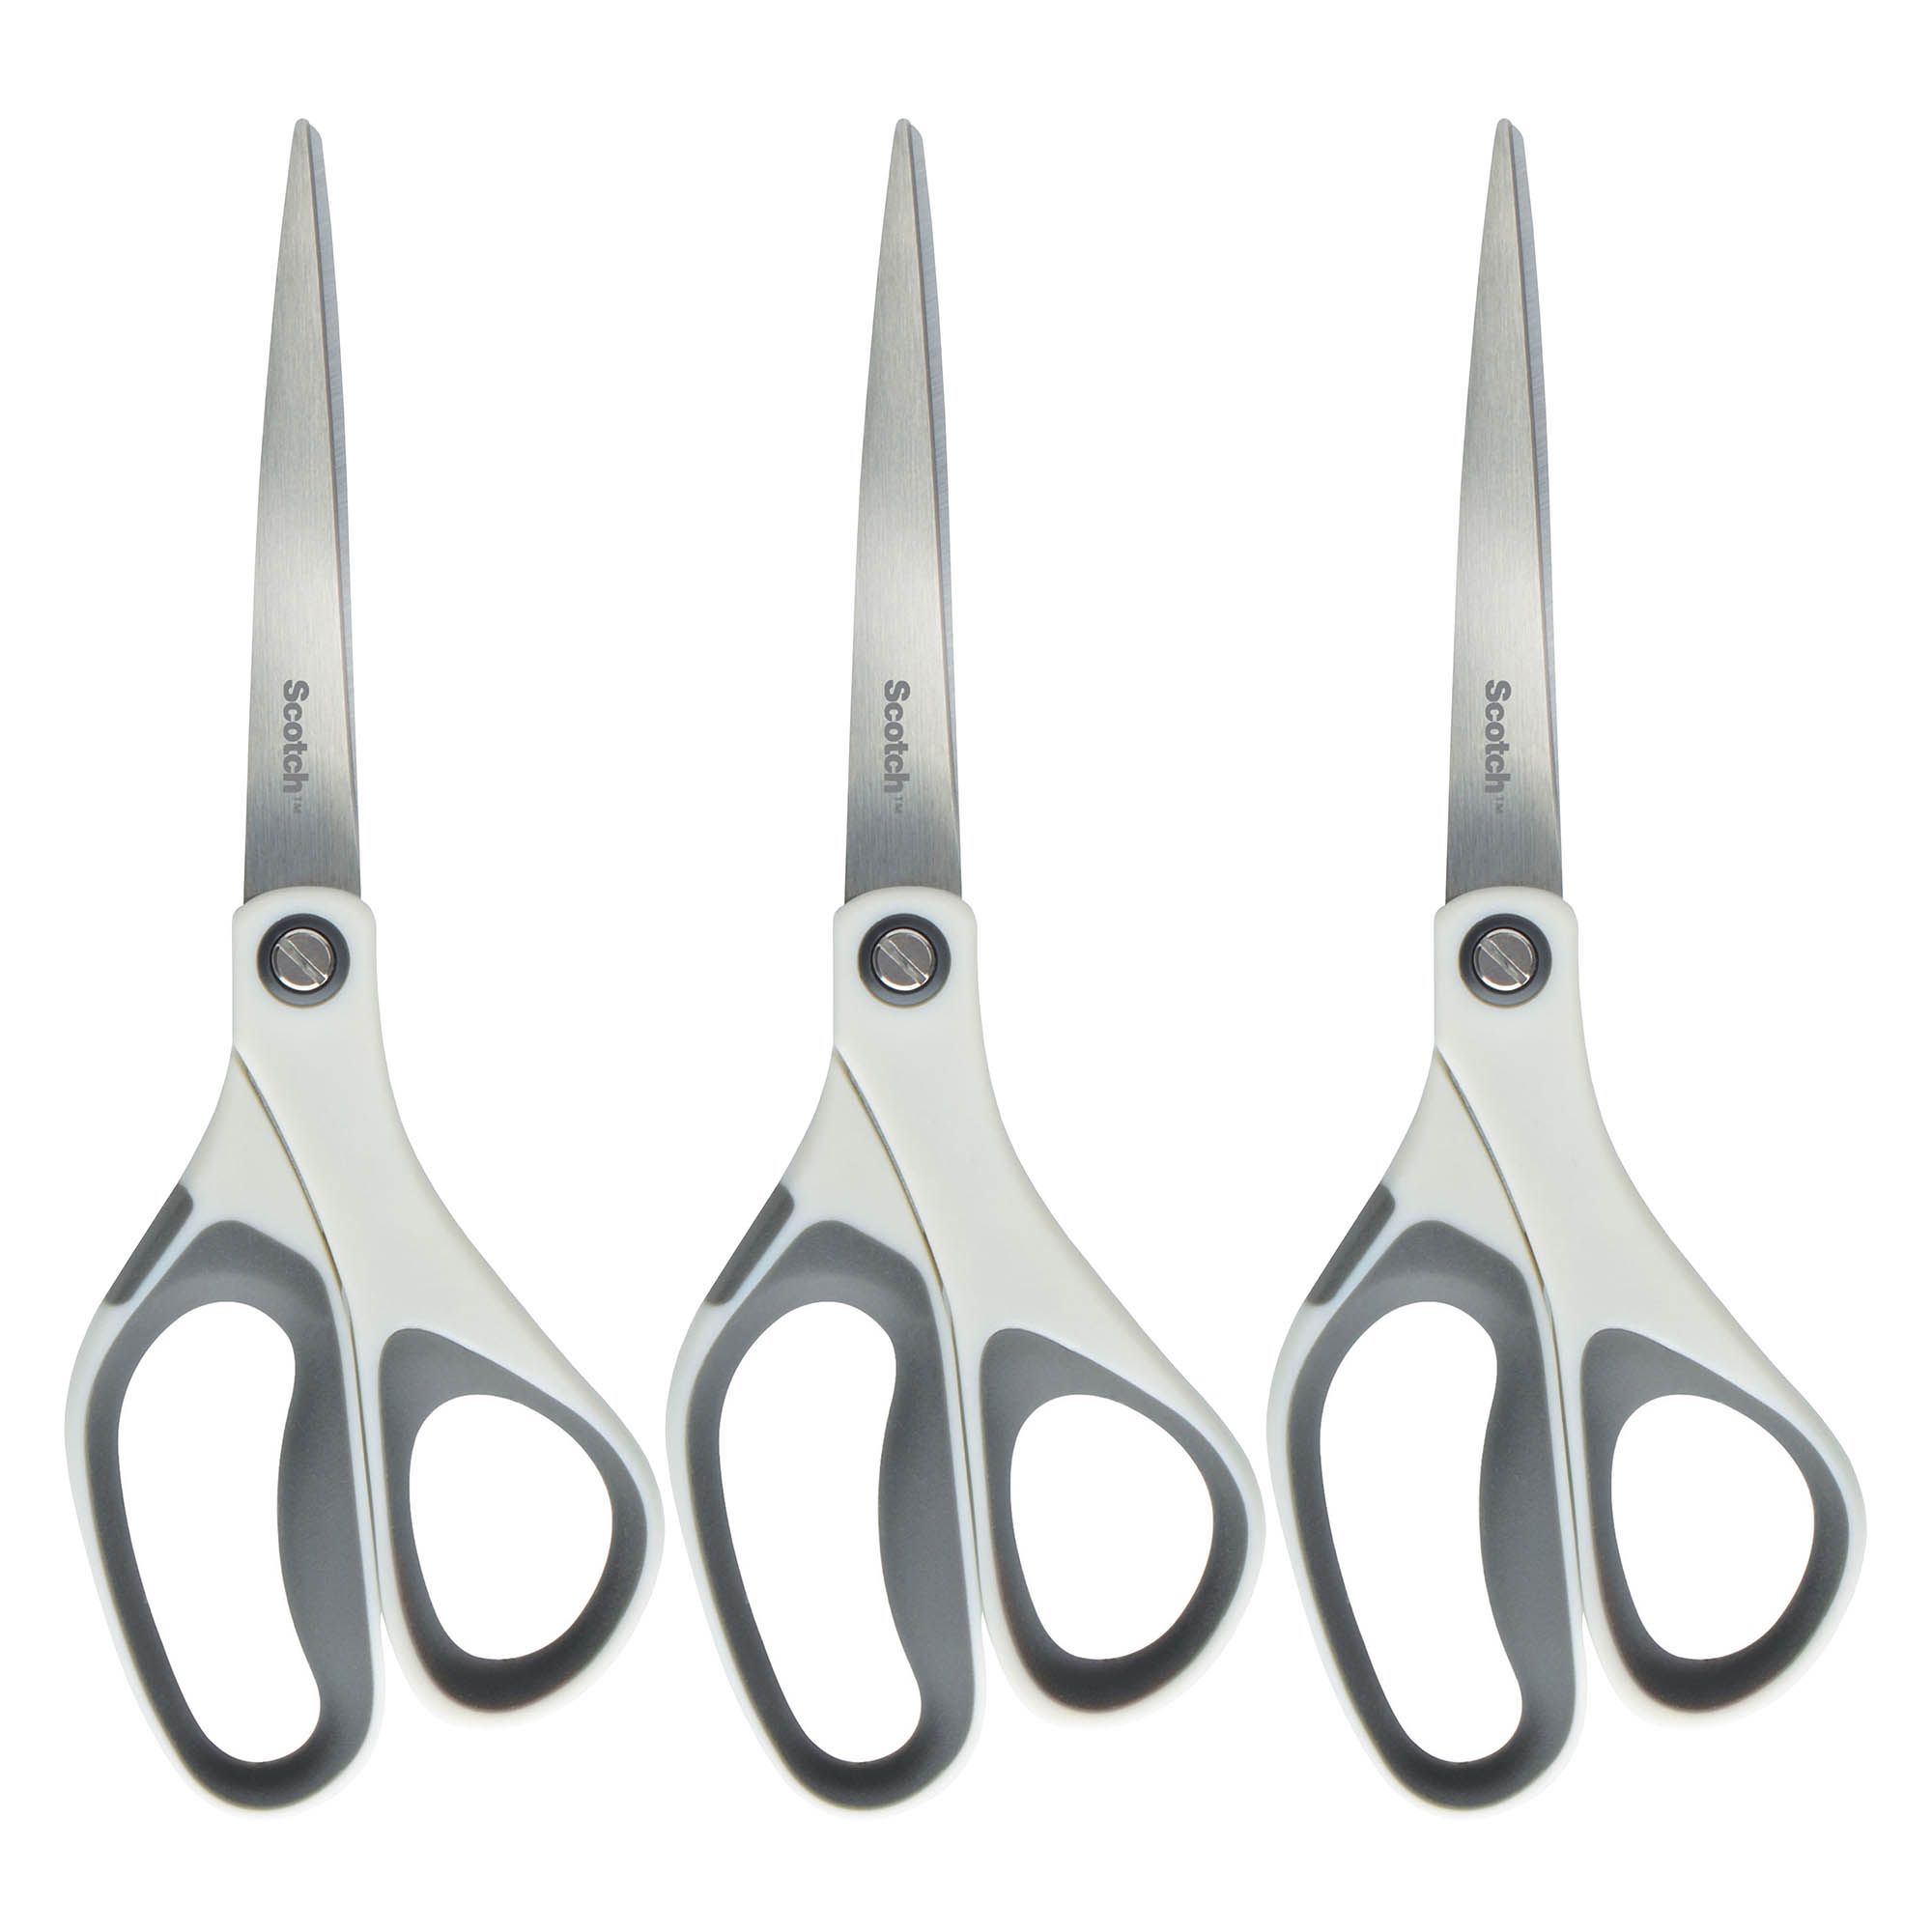 Scotch Precision Stainless Steel Crafting Scissors 8 In. – Kmart Miami #3074